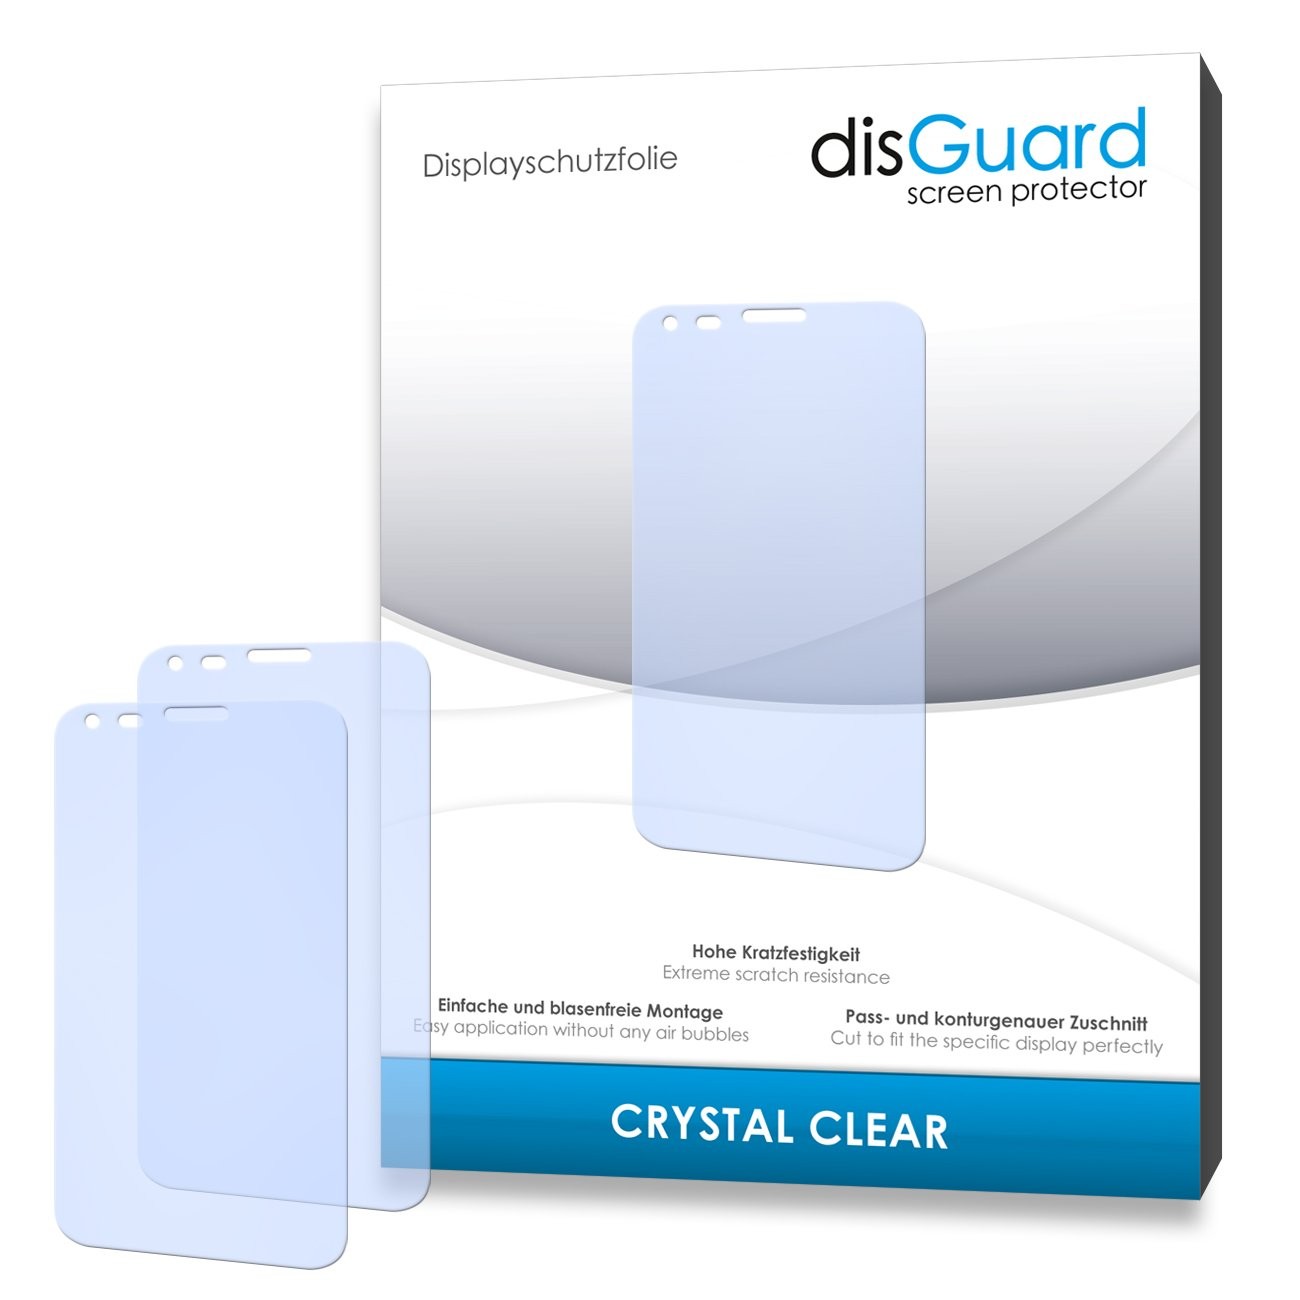 Screen protection. DISGUARD. Touch Anti-Reflective display. Crystal Clear film 17".